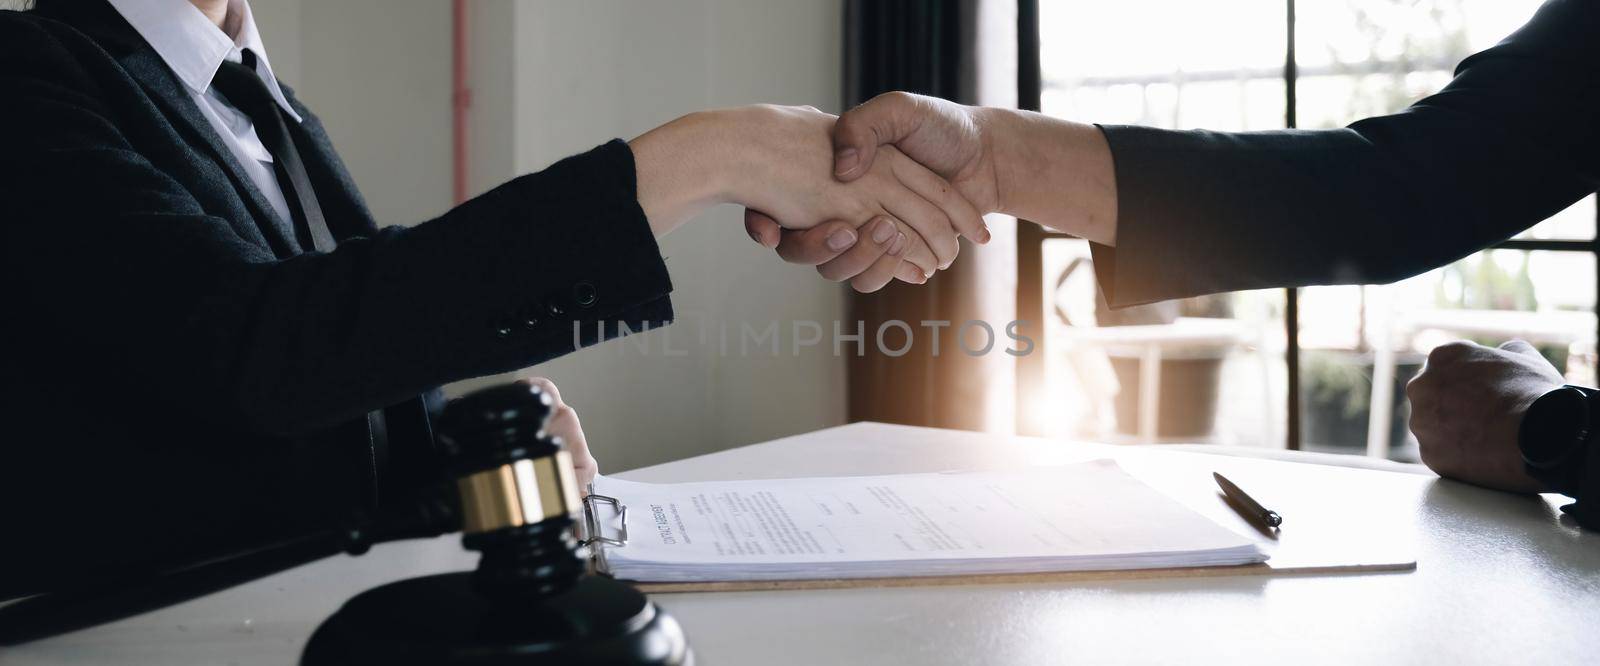 Good service cooperation of Consultation between a male lawyer and business woman customer, Handshake after good deal agreement, Law and Legal concept..